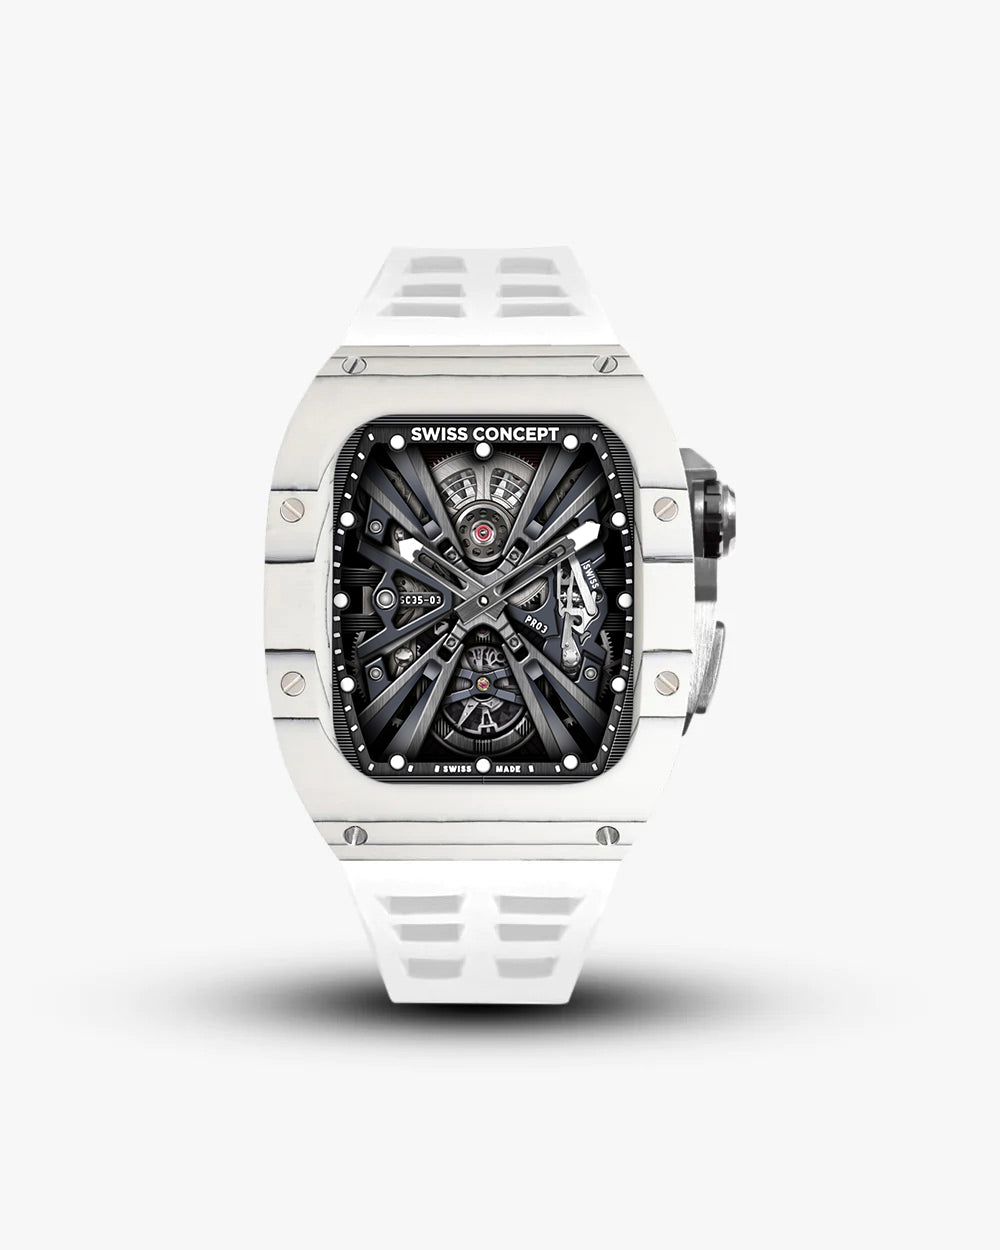 Swiss Concept Racing Elite Edition Bianco Forged Carbon, Stainless Steel & Alpine White Apple Watch Case - Swiss Design